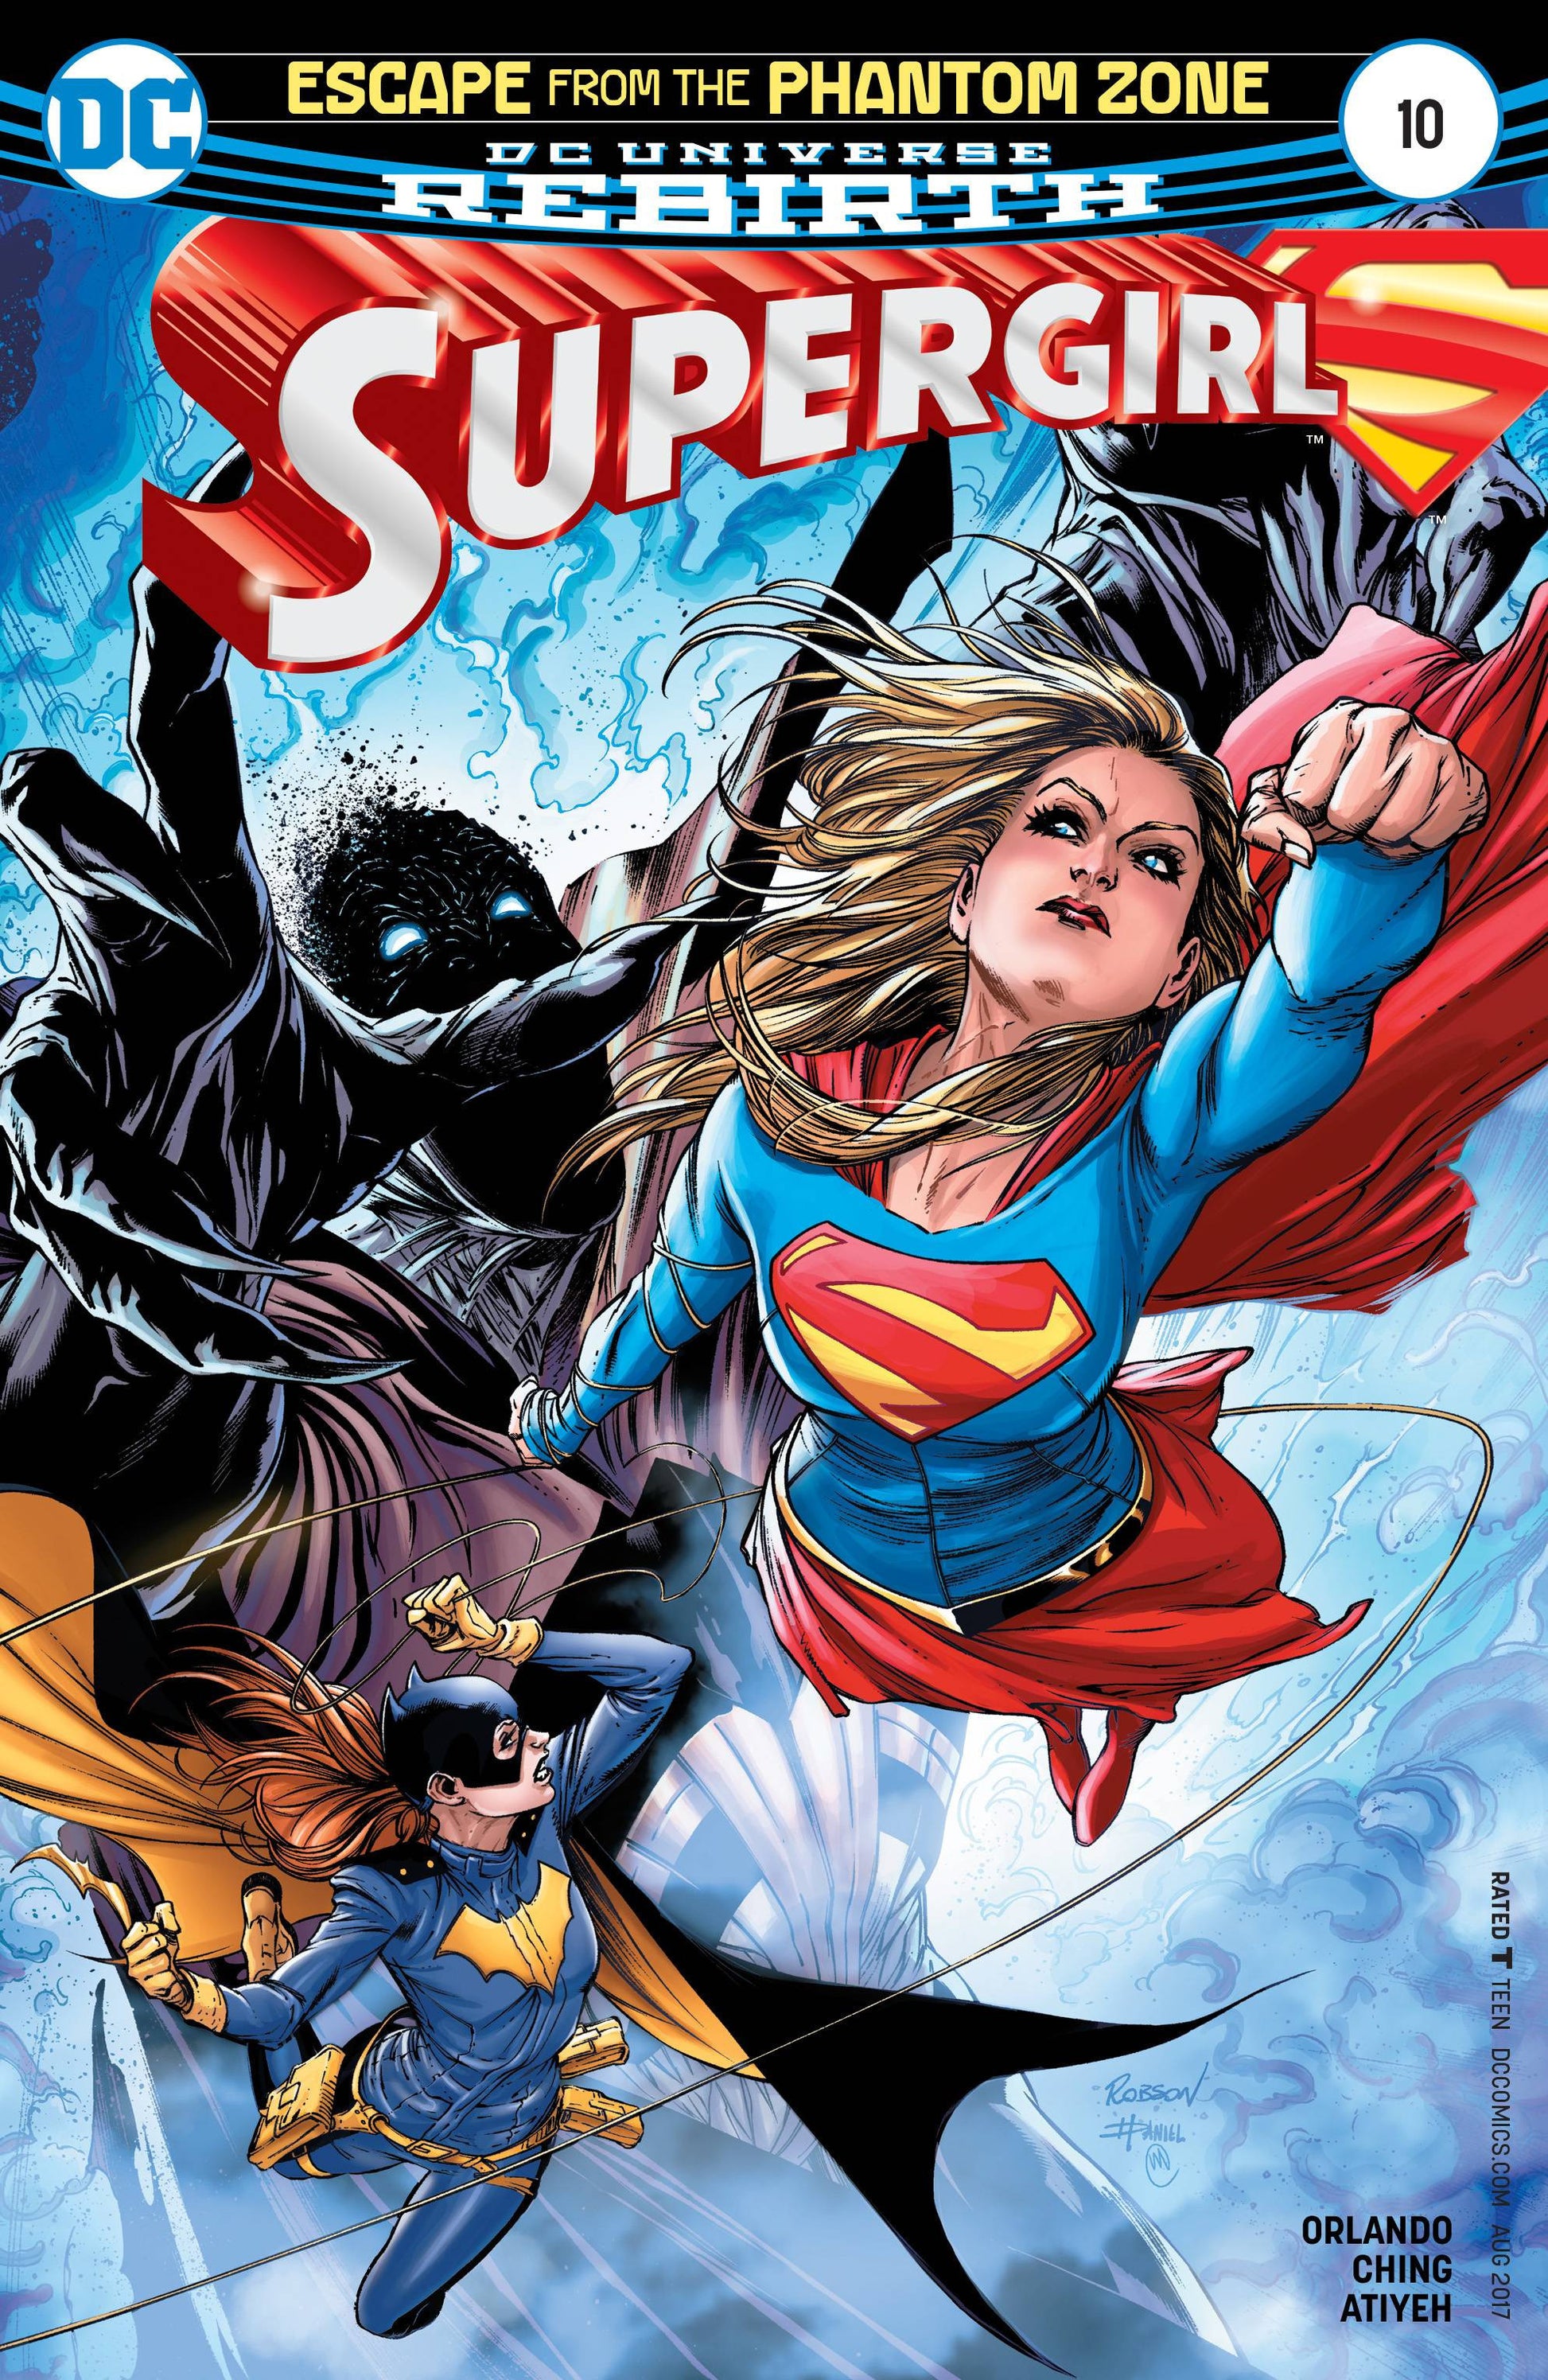 SUPERGIRL #10 COVER